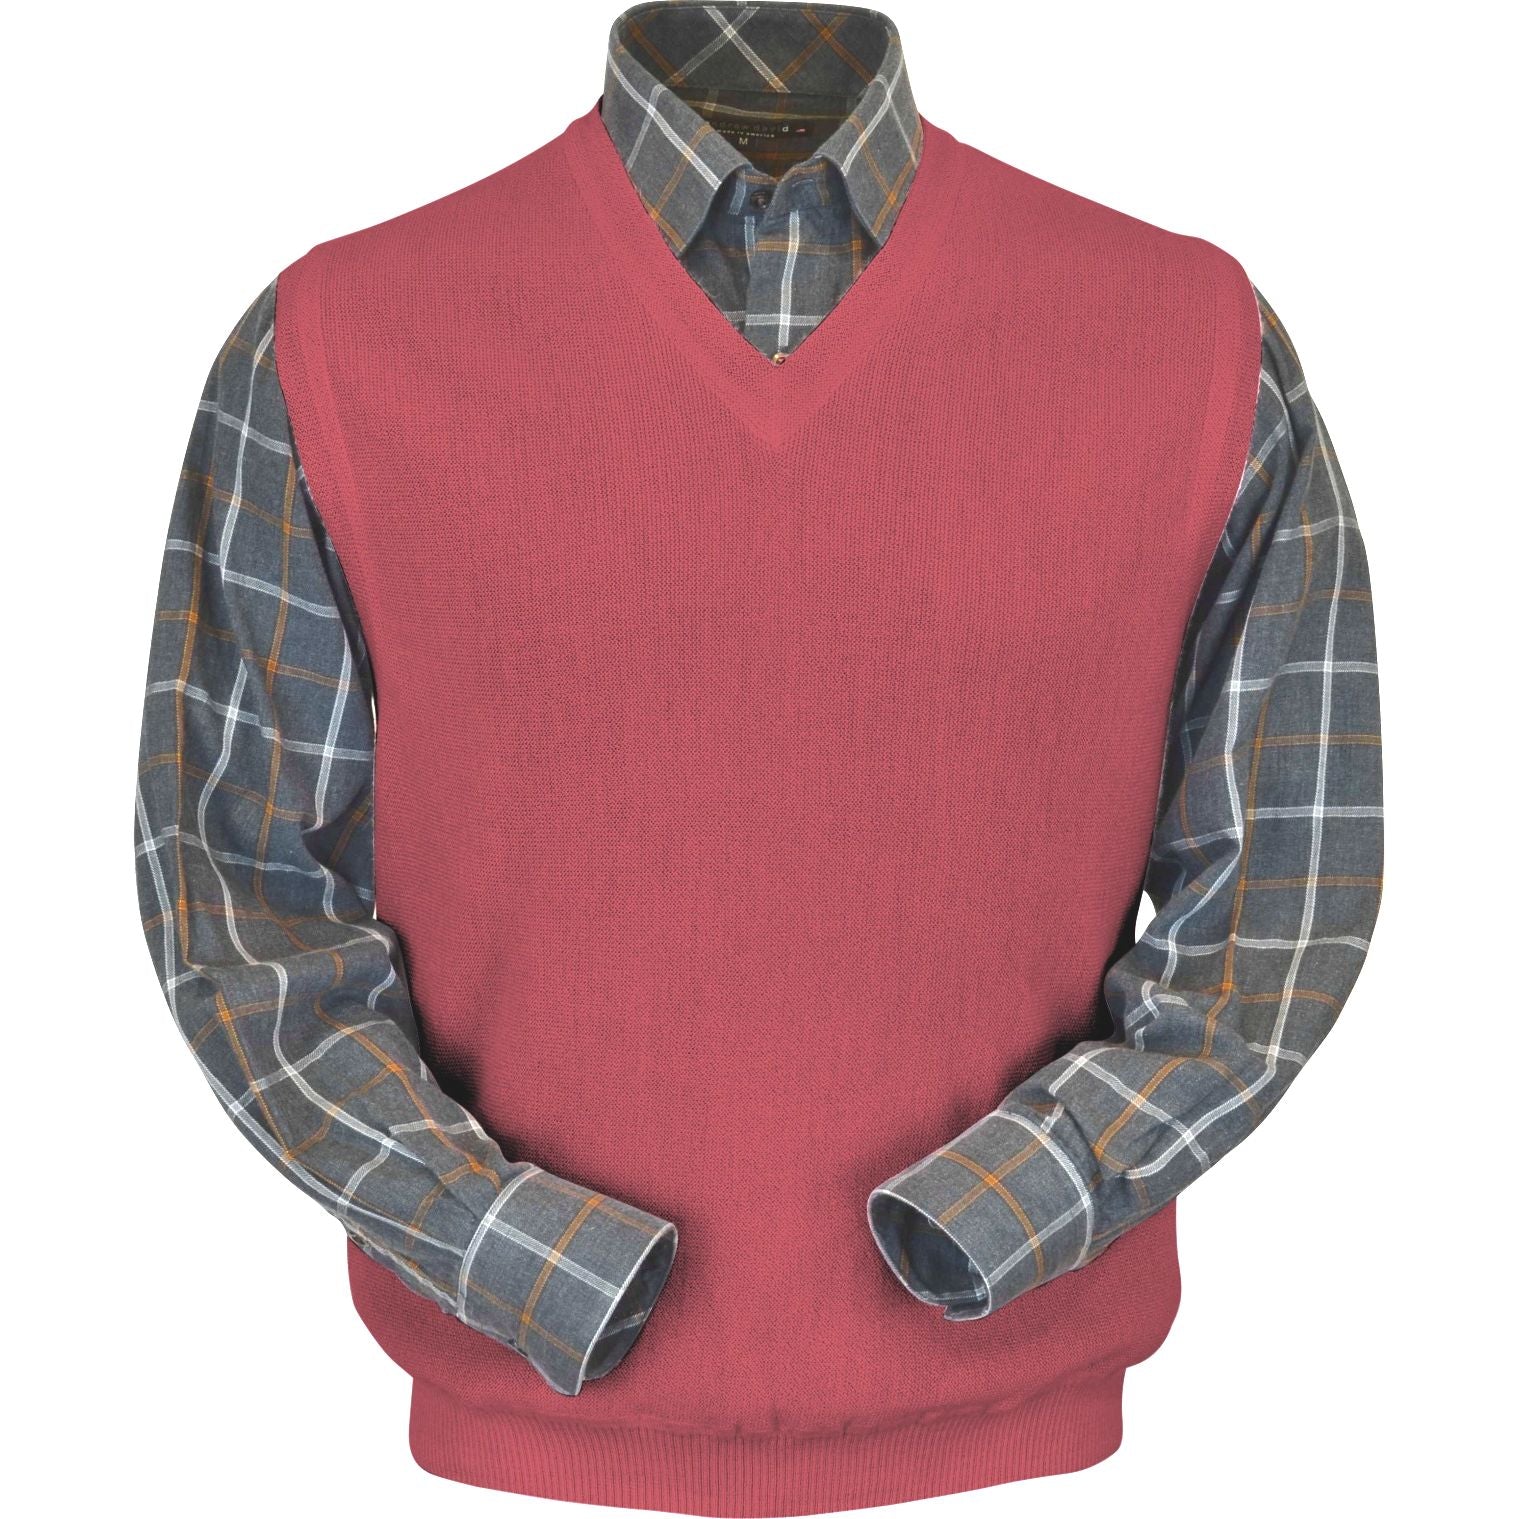 Baby Alpaca 'Links Stitch' V-Neck Sweater Vest in Red Coral Heather by Peru Unlimited